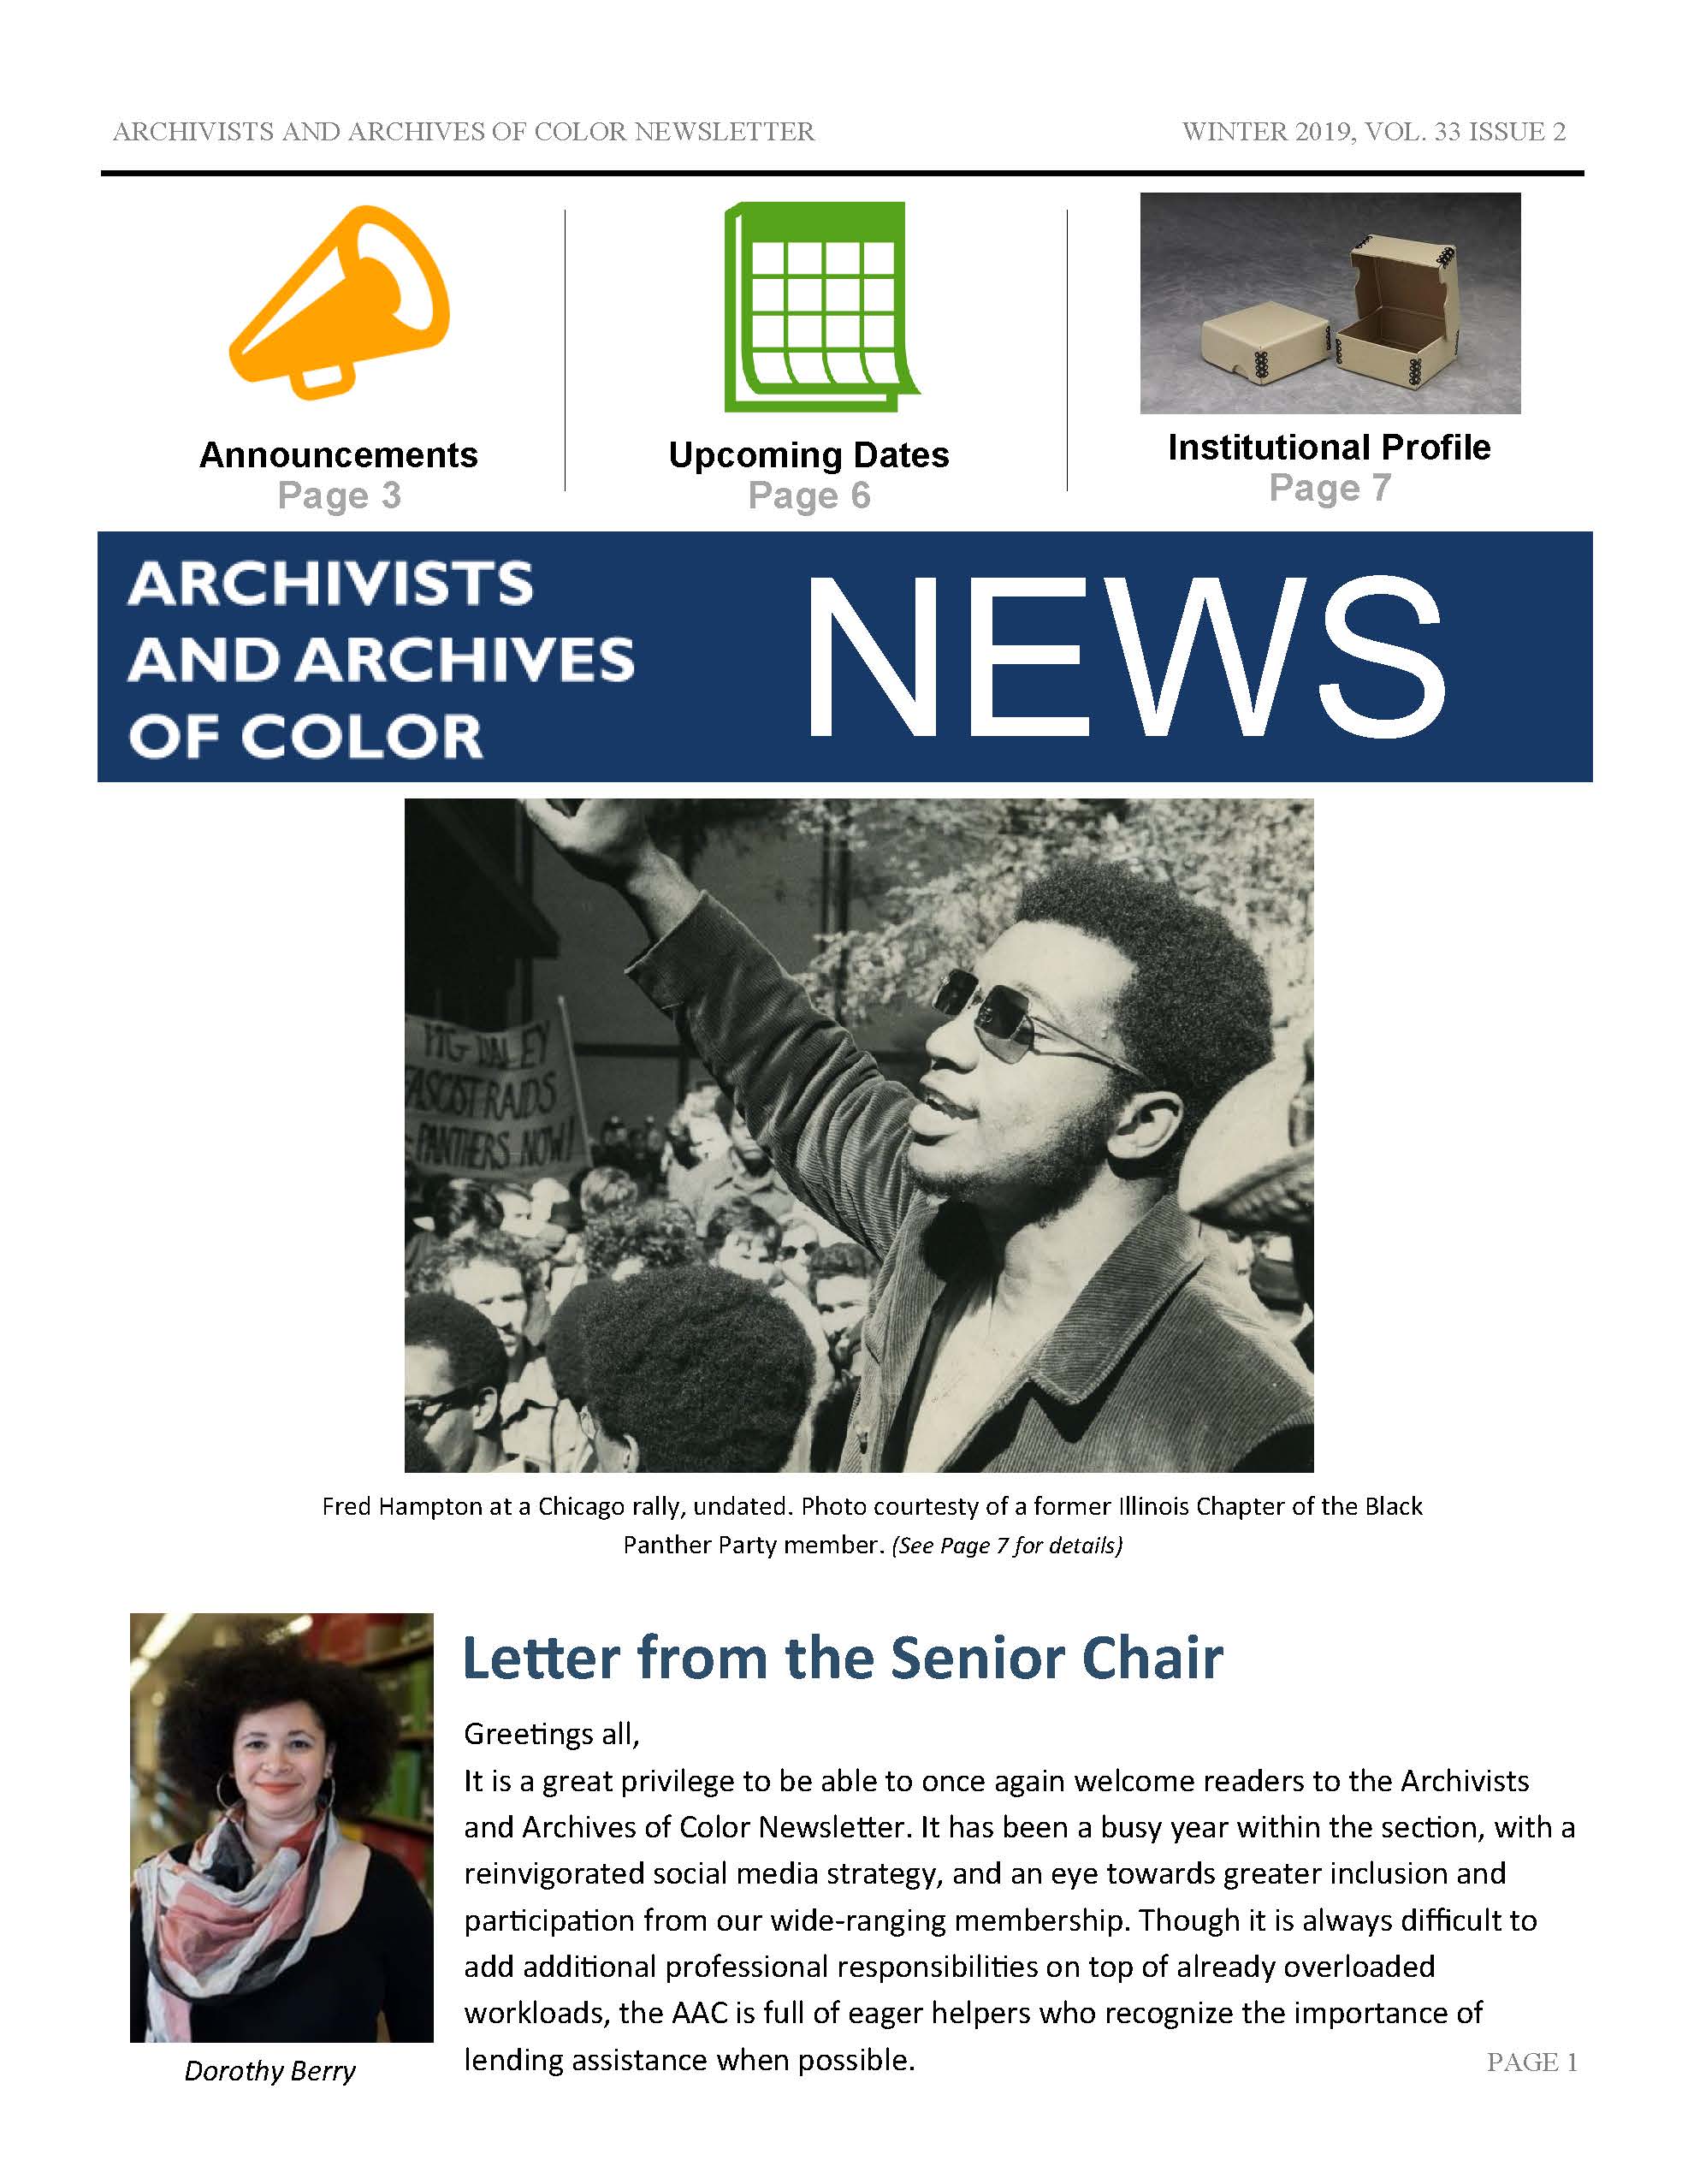 Archivists and Archives of Color Newsletter Winter 2019, Vol. 33 No. 2